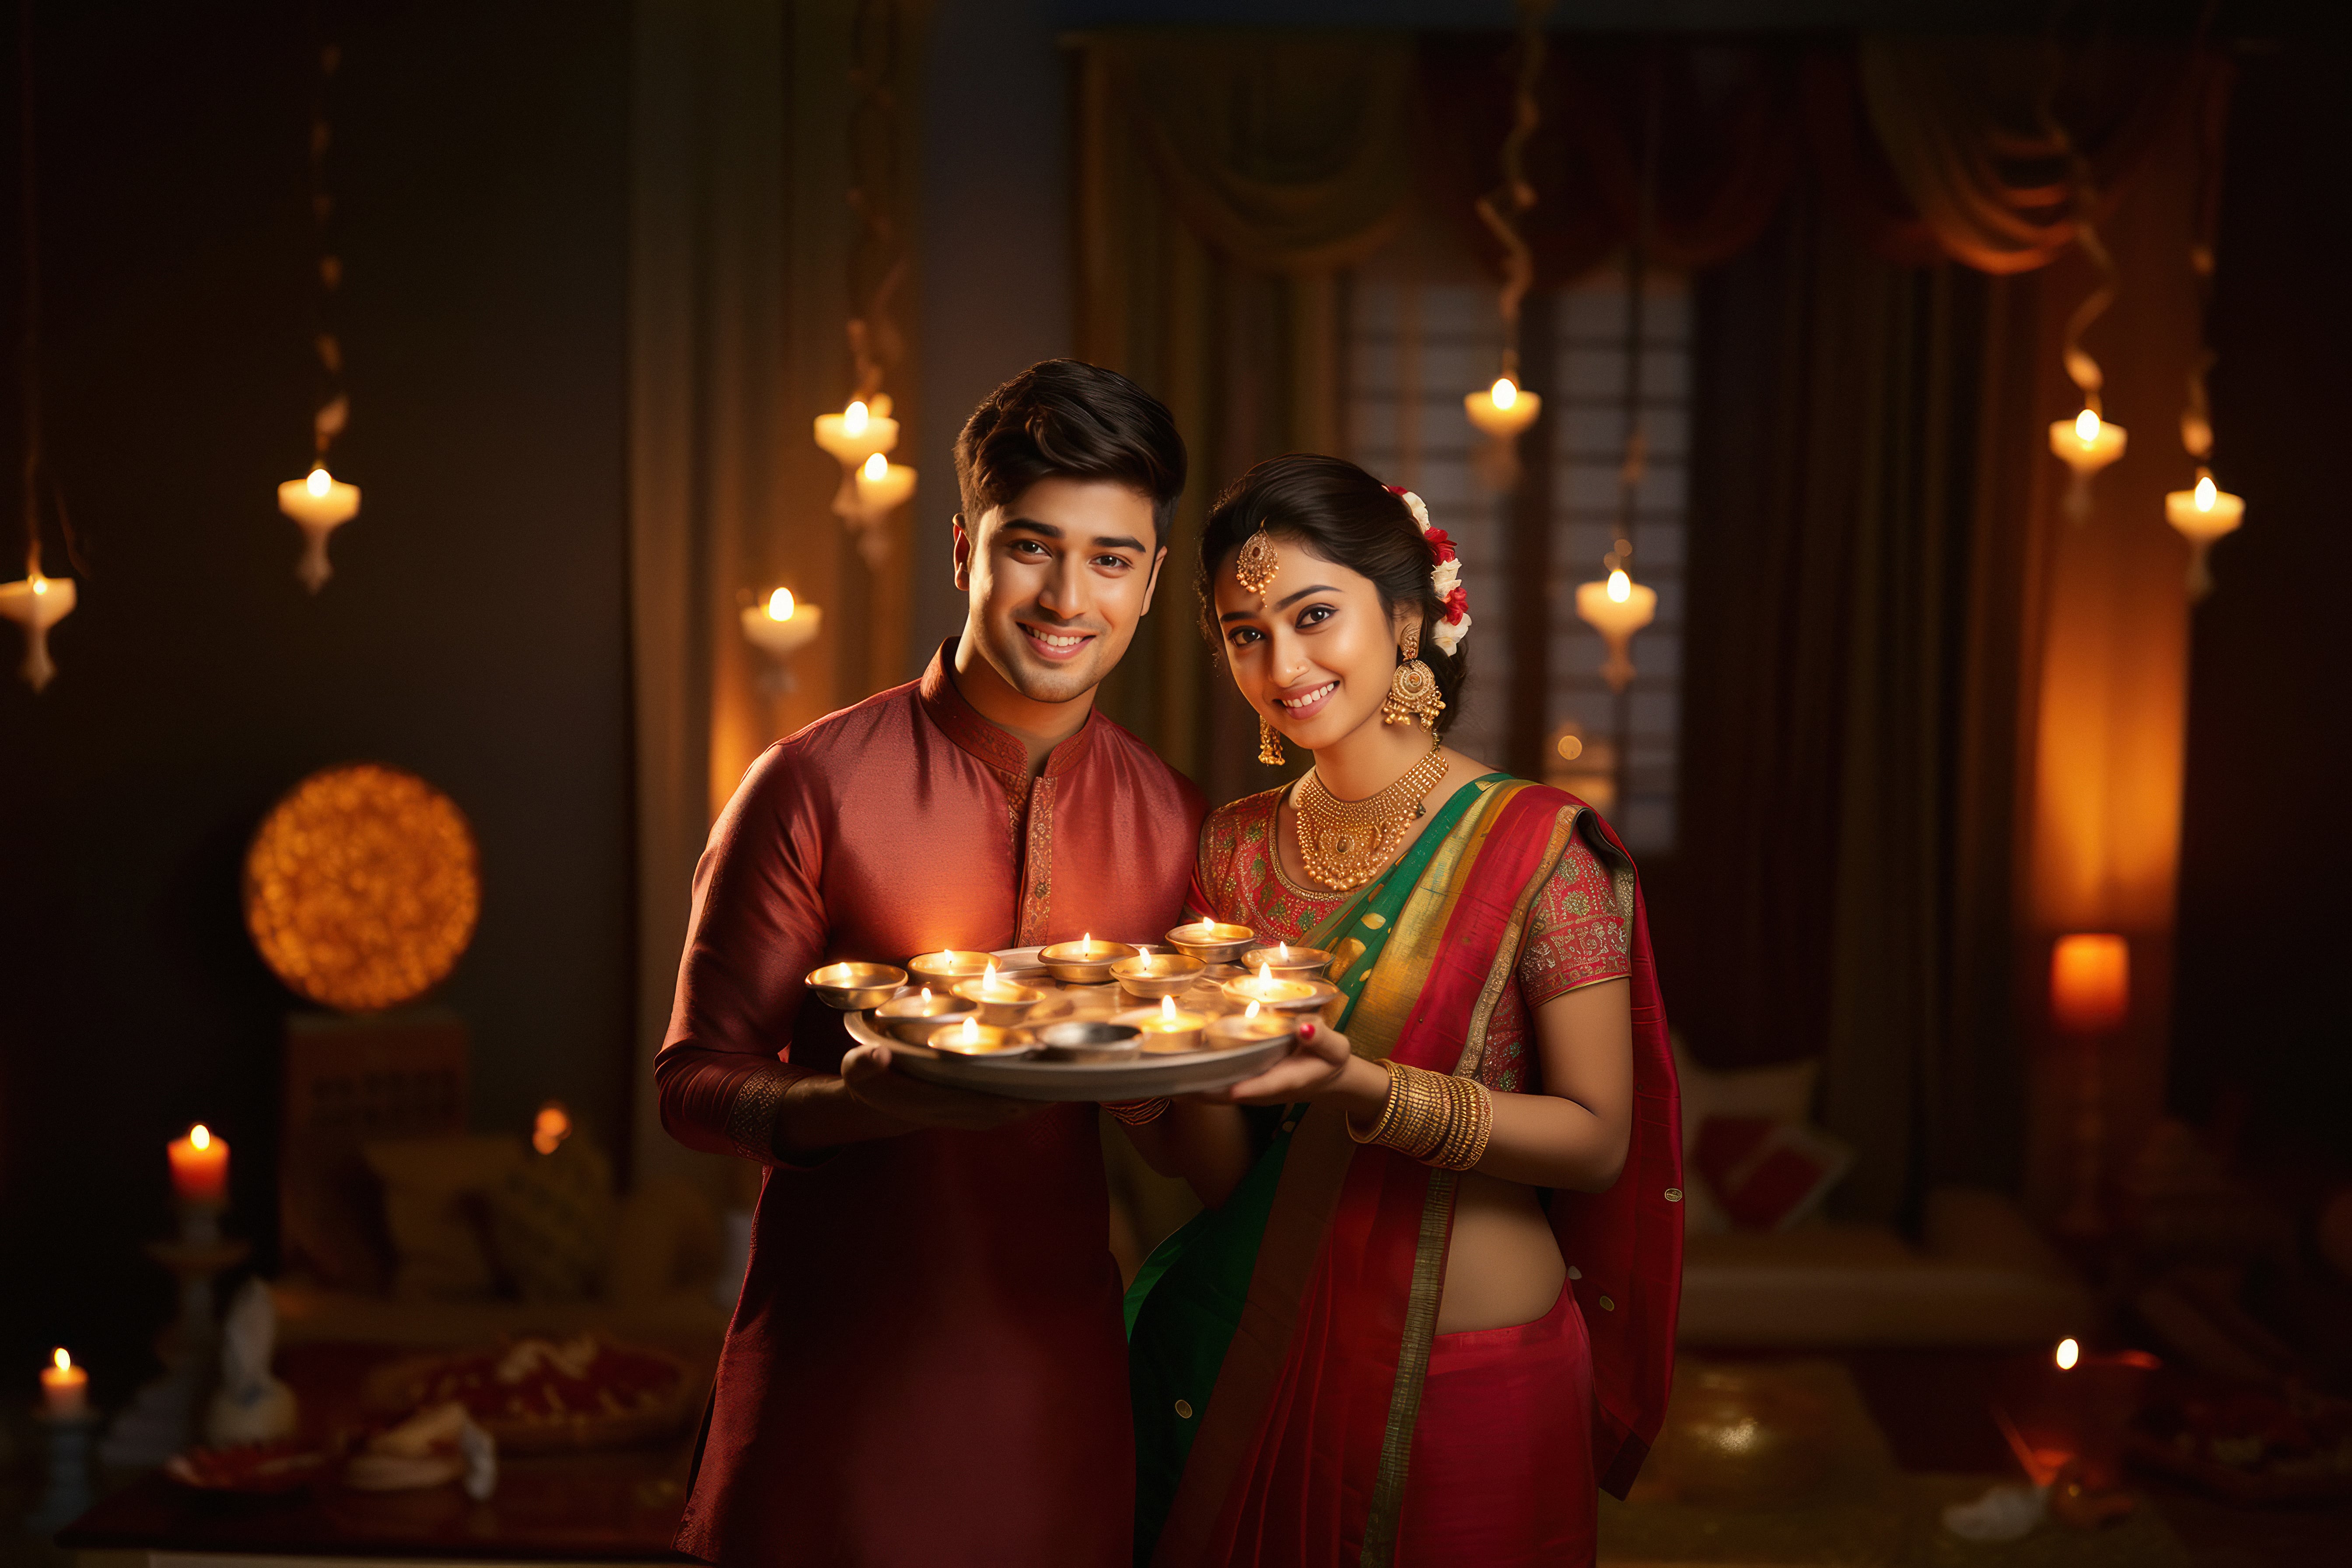 A couple smiling, surrounded by candlelight illuminating the darkness during Diwali celebrations